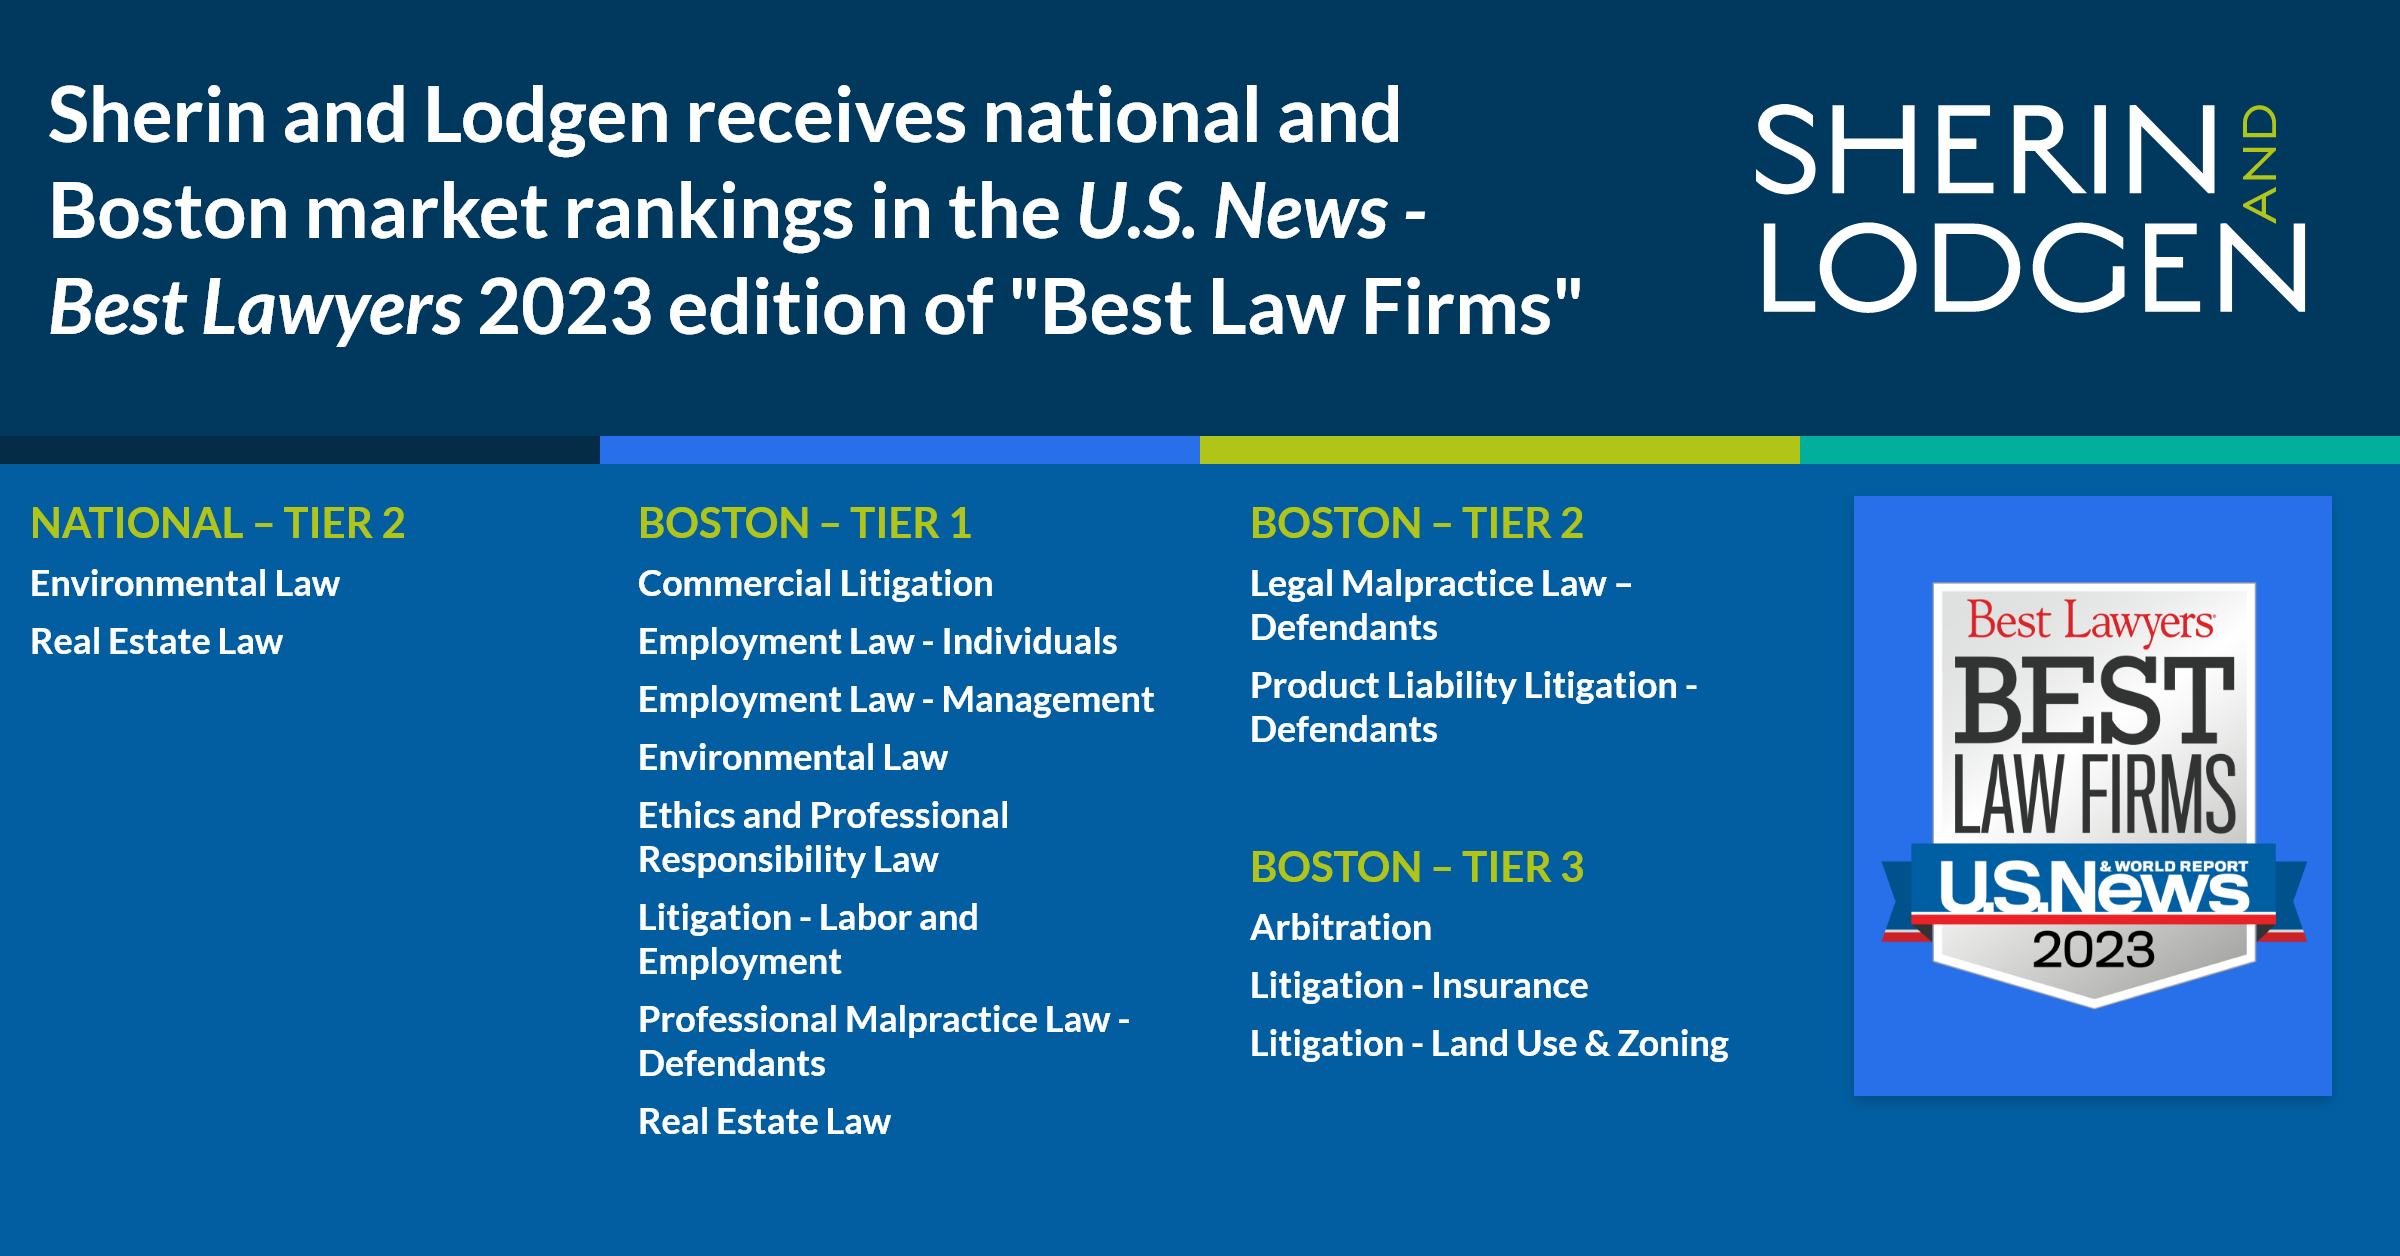 Sherin and Lodgen named to 2023 “Best Law Firms” list by U.S. News